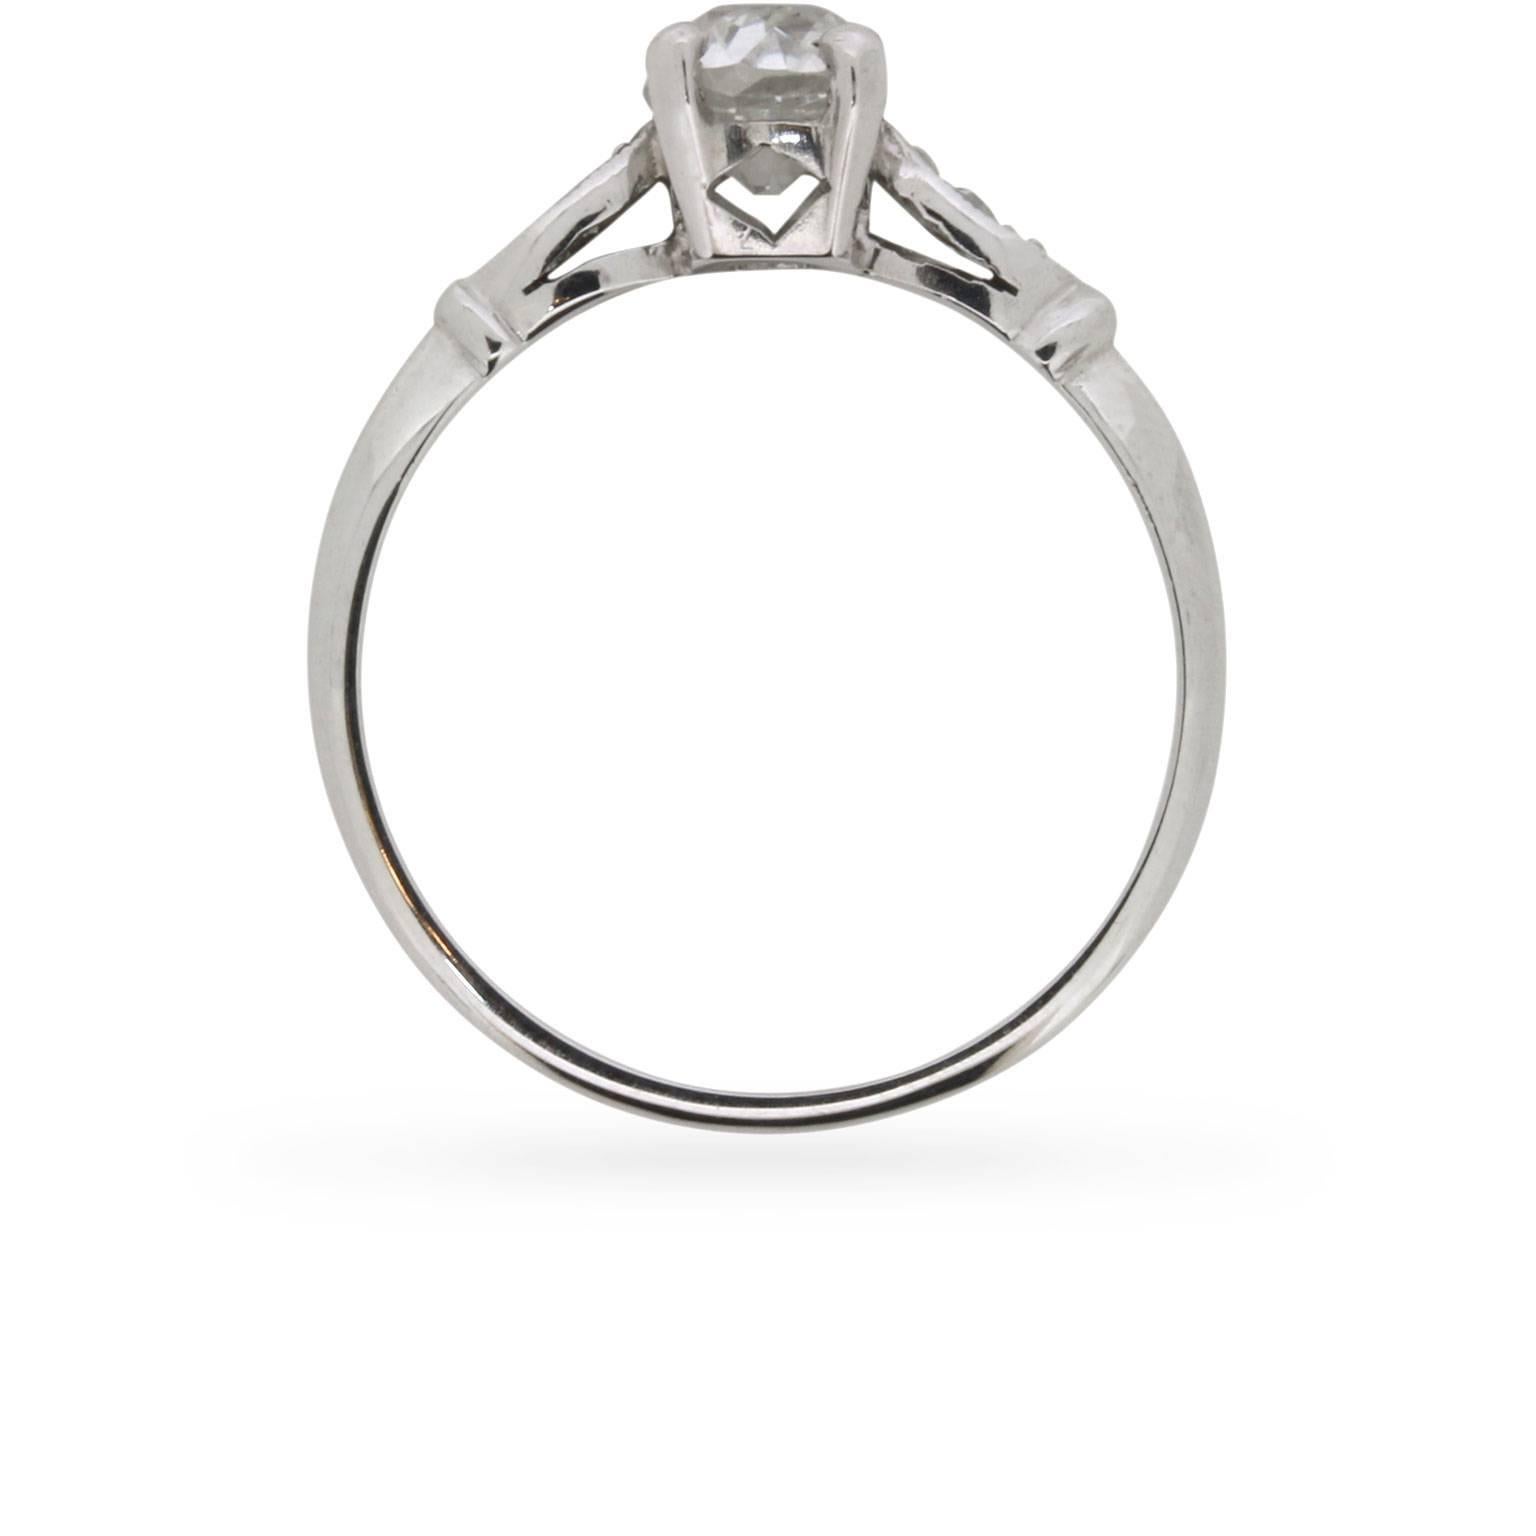 This is a delicate little ring, with a beautiful old cut oval stone in the centre. It has a weight of 0.80 carat and is grade colour G and clarity SI1. The certification is from EDR. The stone is then wonderfully set in the platinum mount using